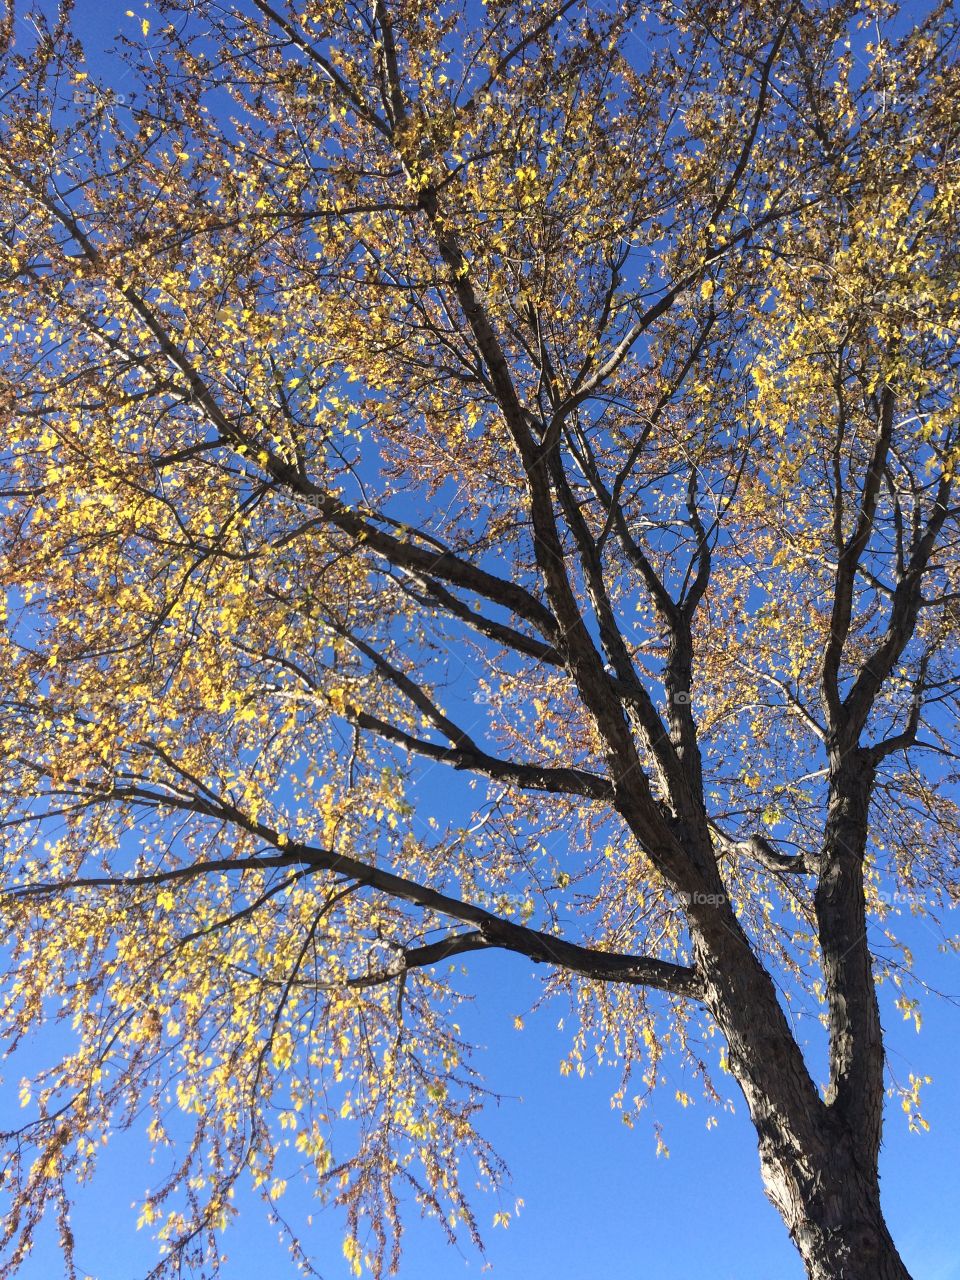 Golden yellow leaves, clear sky